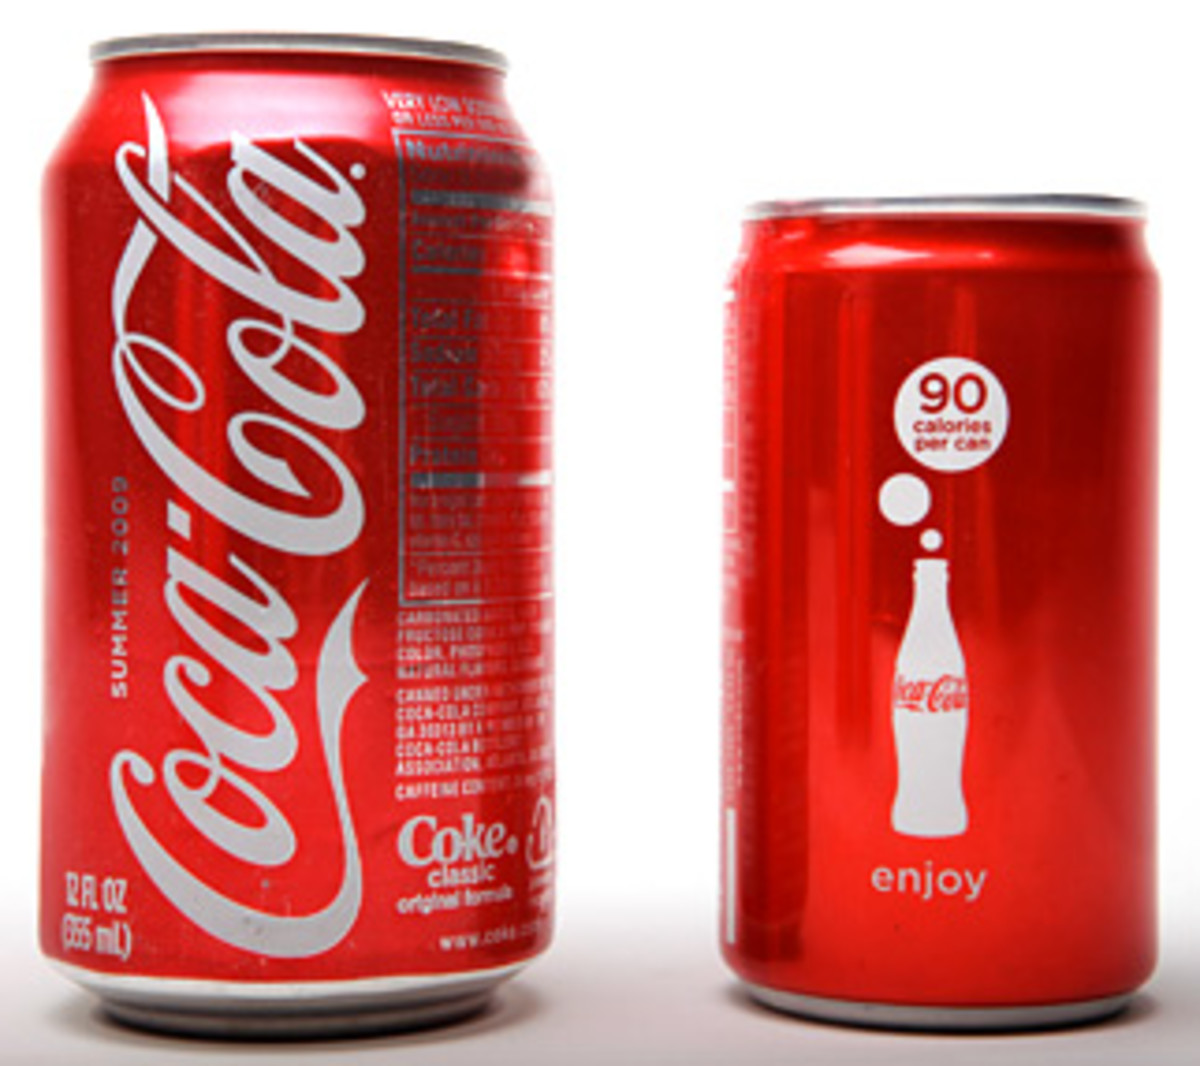 Transparency for Food Labels and Calories - Coca-Cola Lists Calories Boldly on New Package Design